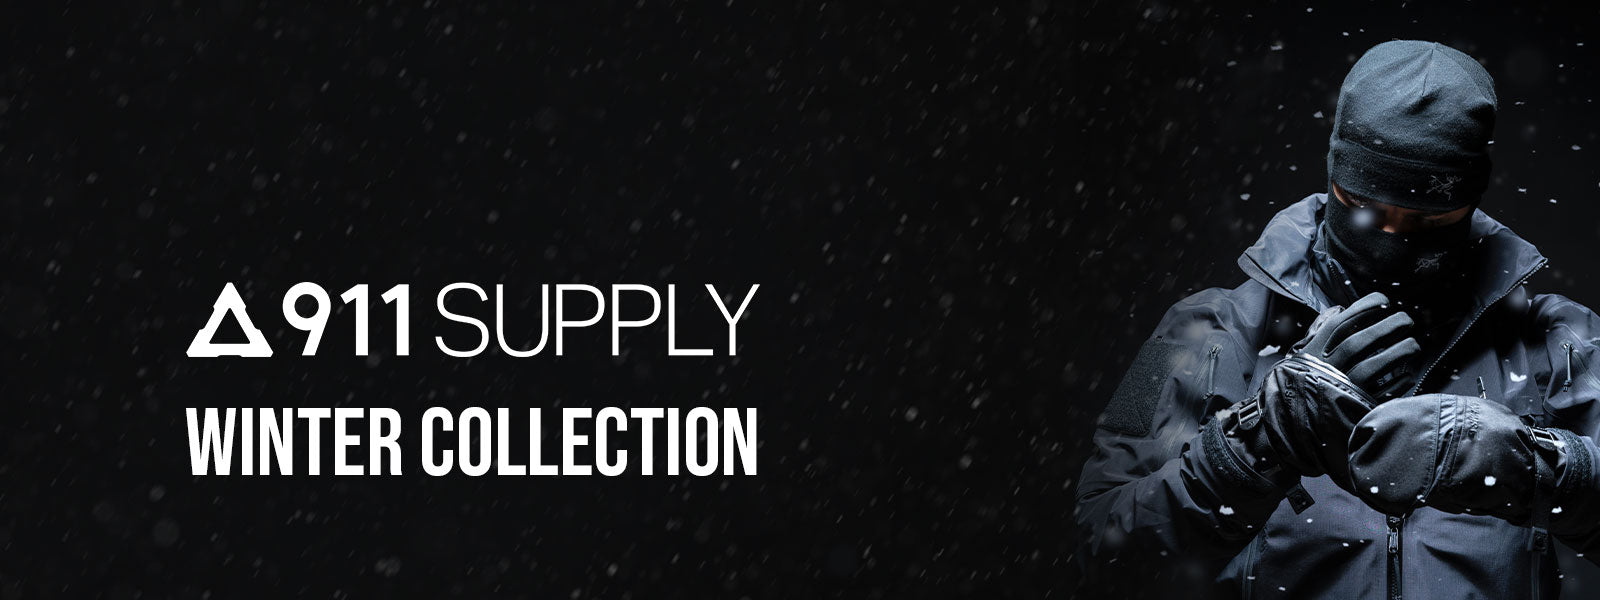 Winter Collection - 911supply